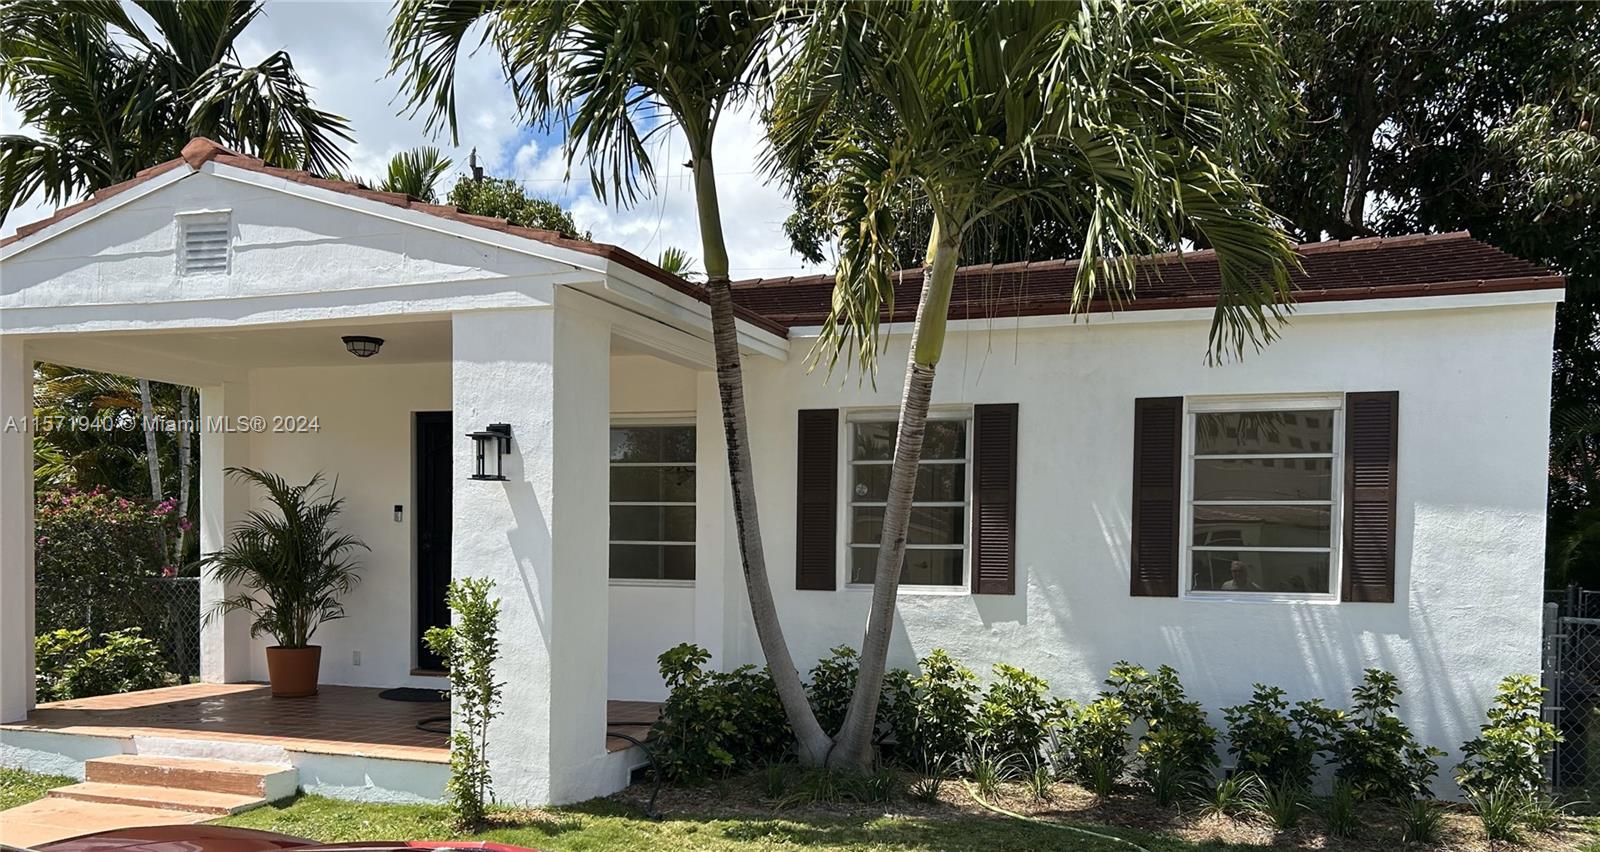 Great rental in Coral Gables. Well maintain and just updated. New kitchen appliance, new a/c, painted, landscape. Excellent condition.  2/1 with office space.  Possible 3rd bedroom conversion if requested by tenant.